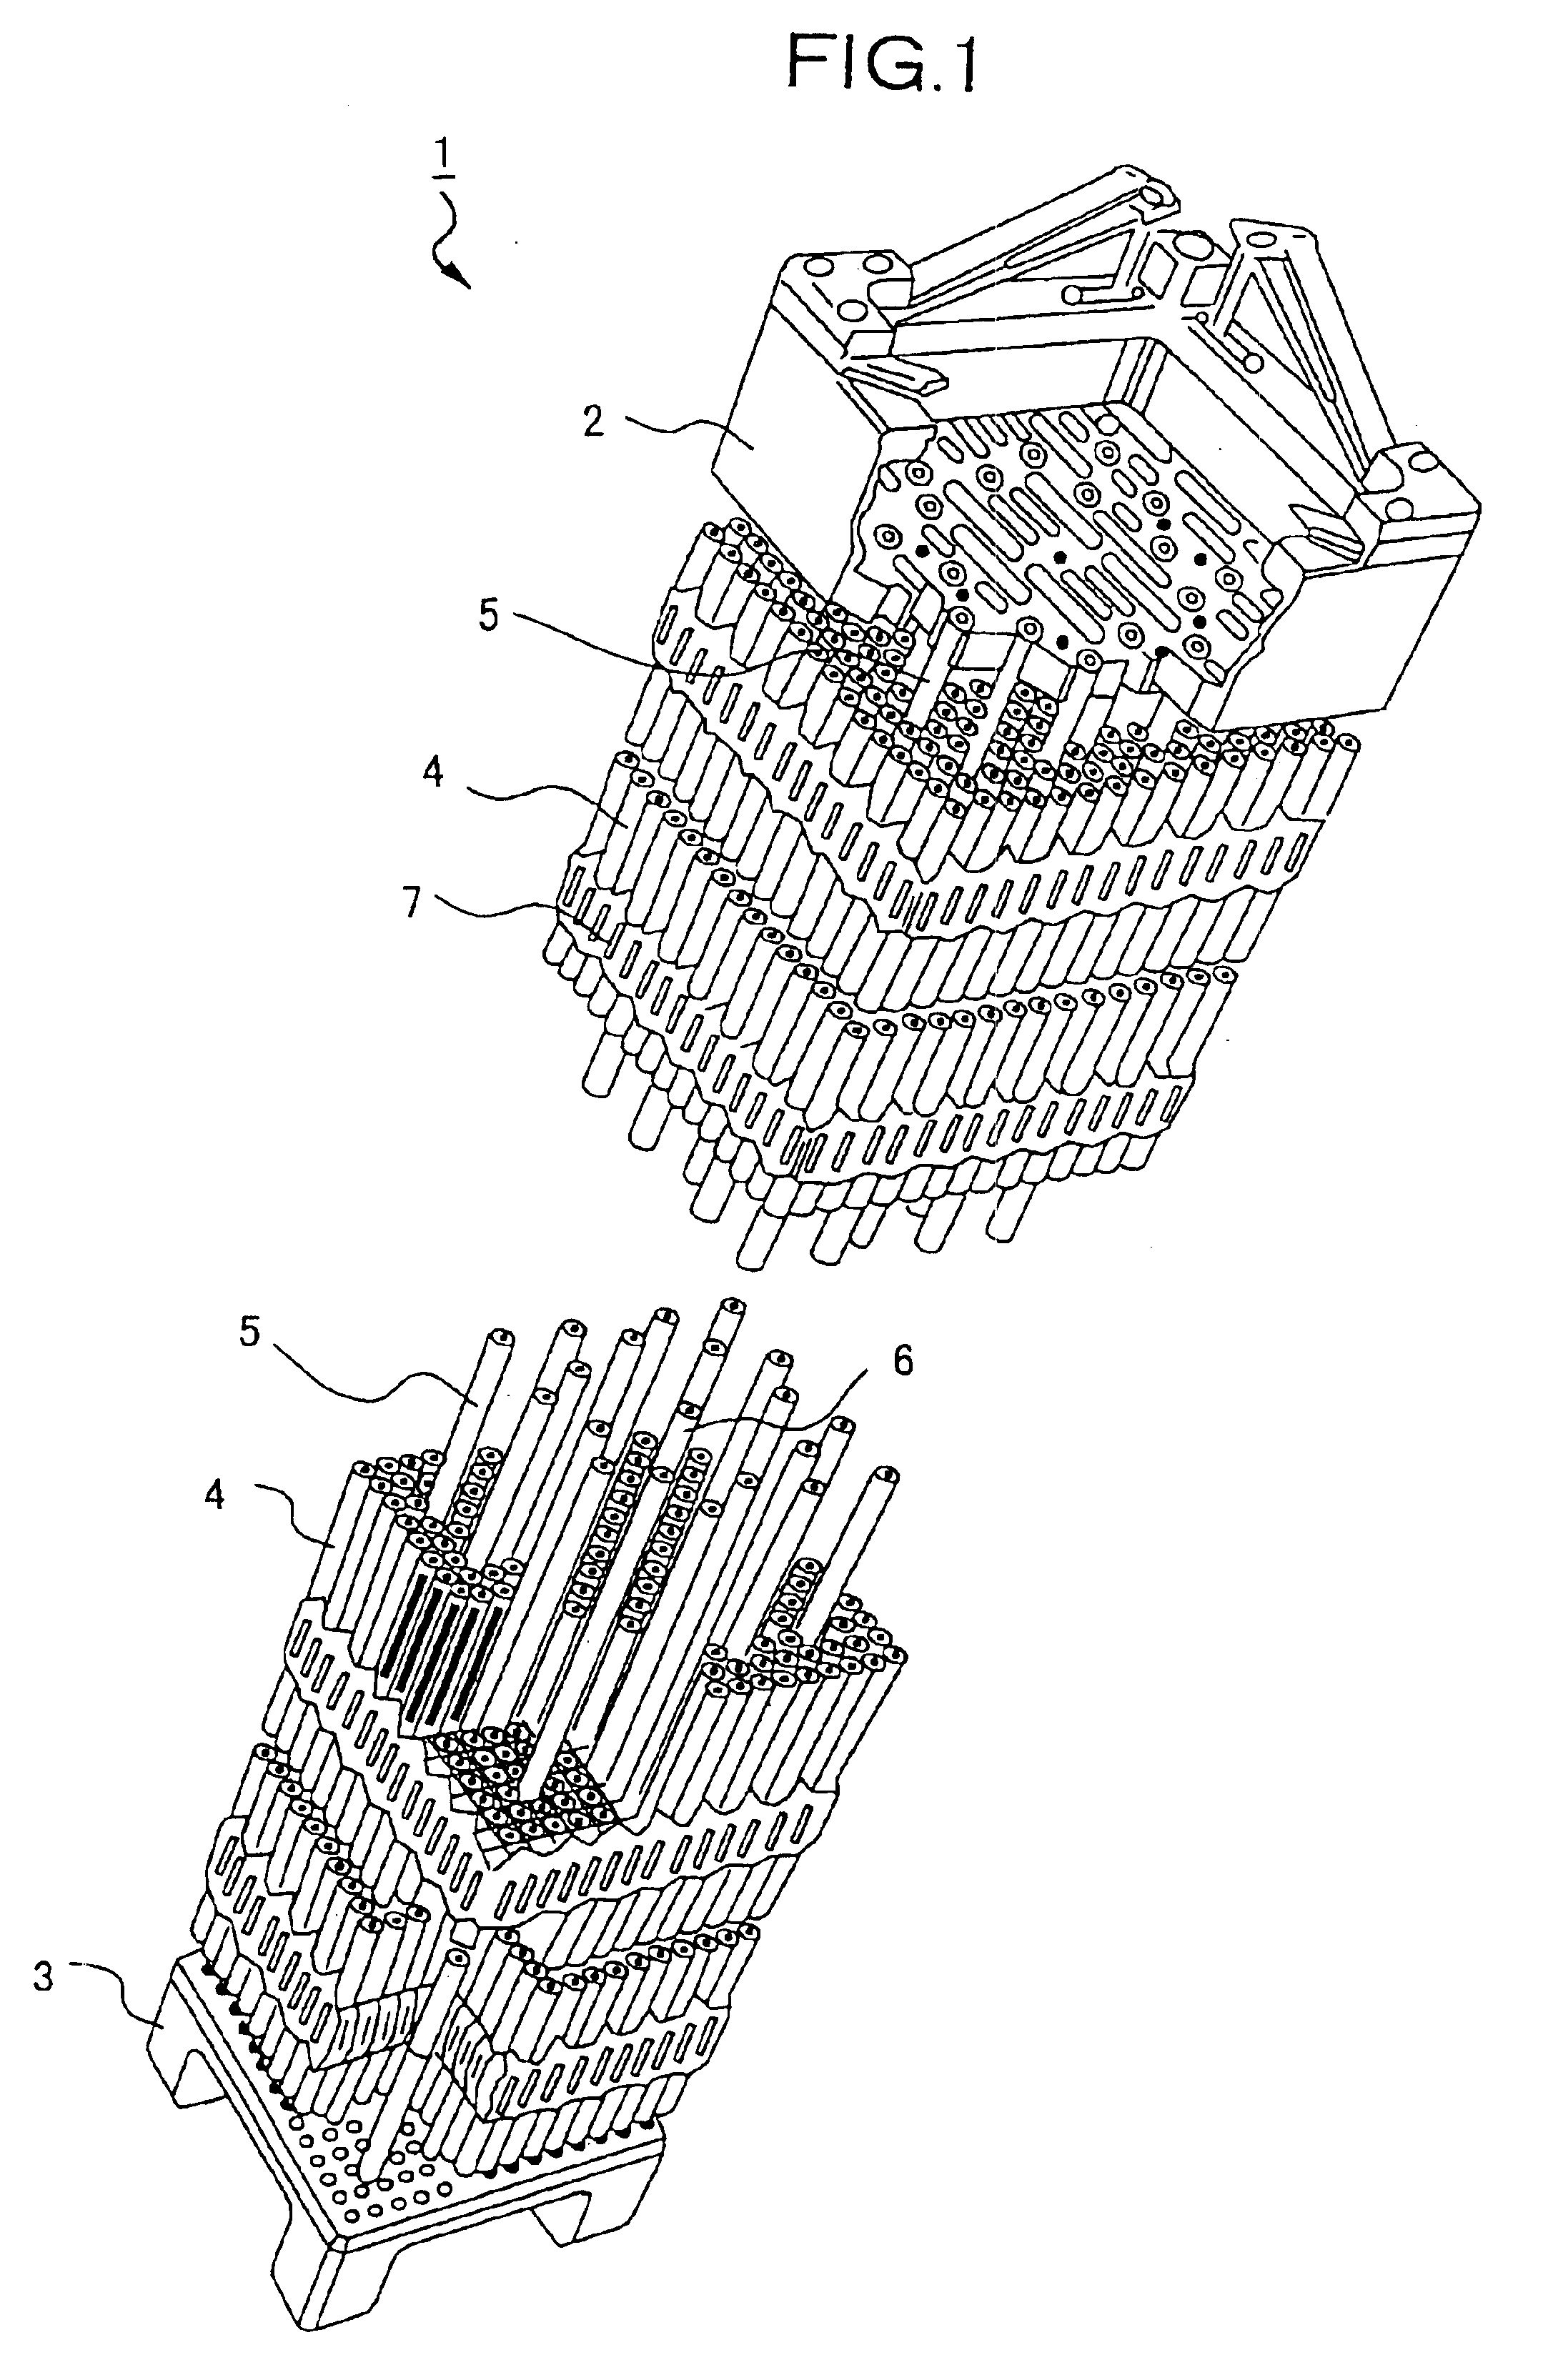 Absorbing rod, an apparatus for inserting the absorbing rod, a cask, and a method of storing spent fuel assemblies